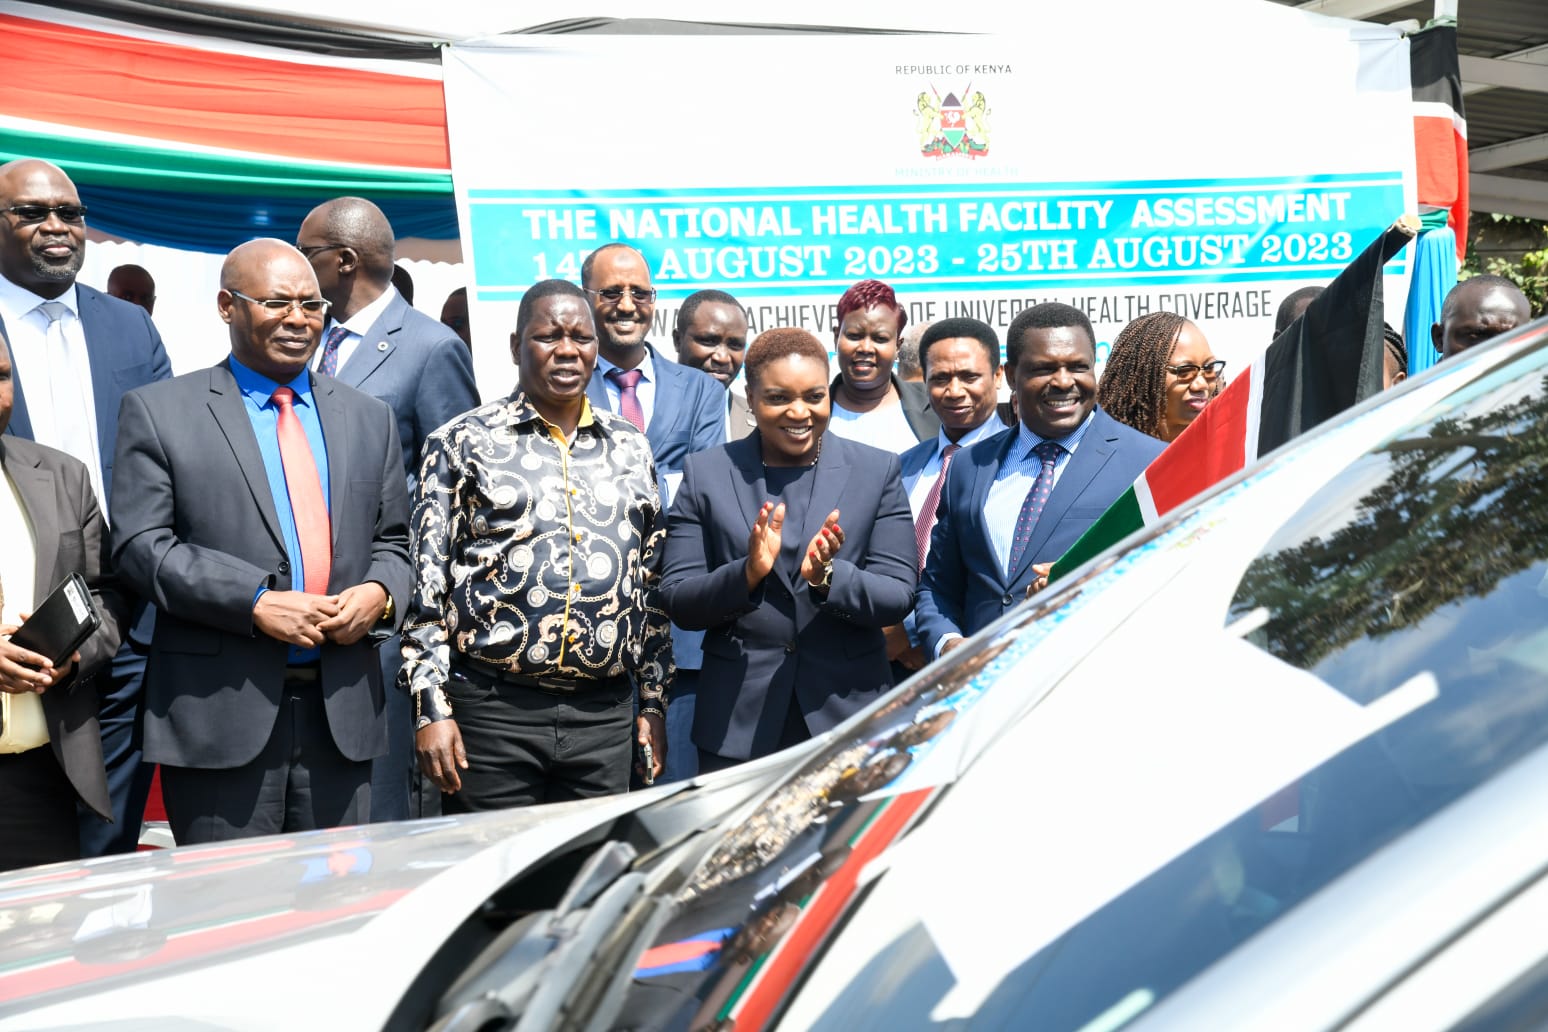 Government Launches Nationwide Health Facility Assessment Census to Enhance Service Delivery